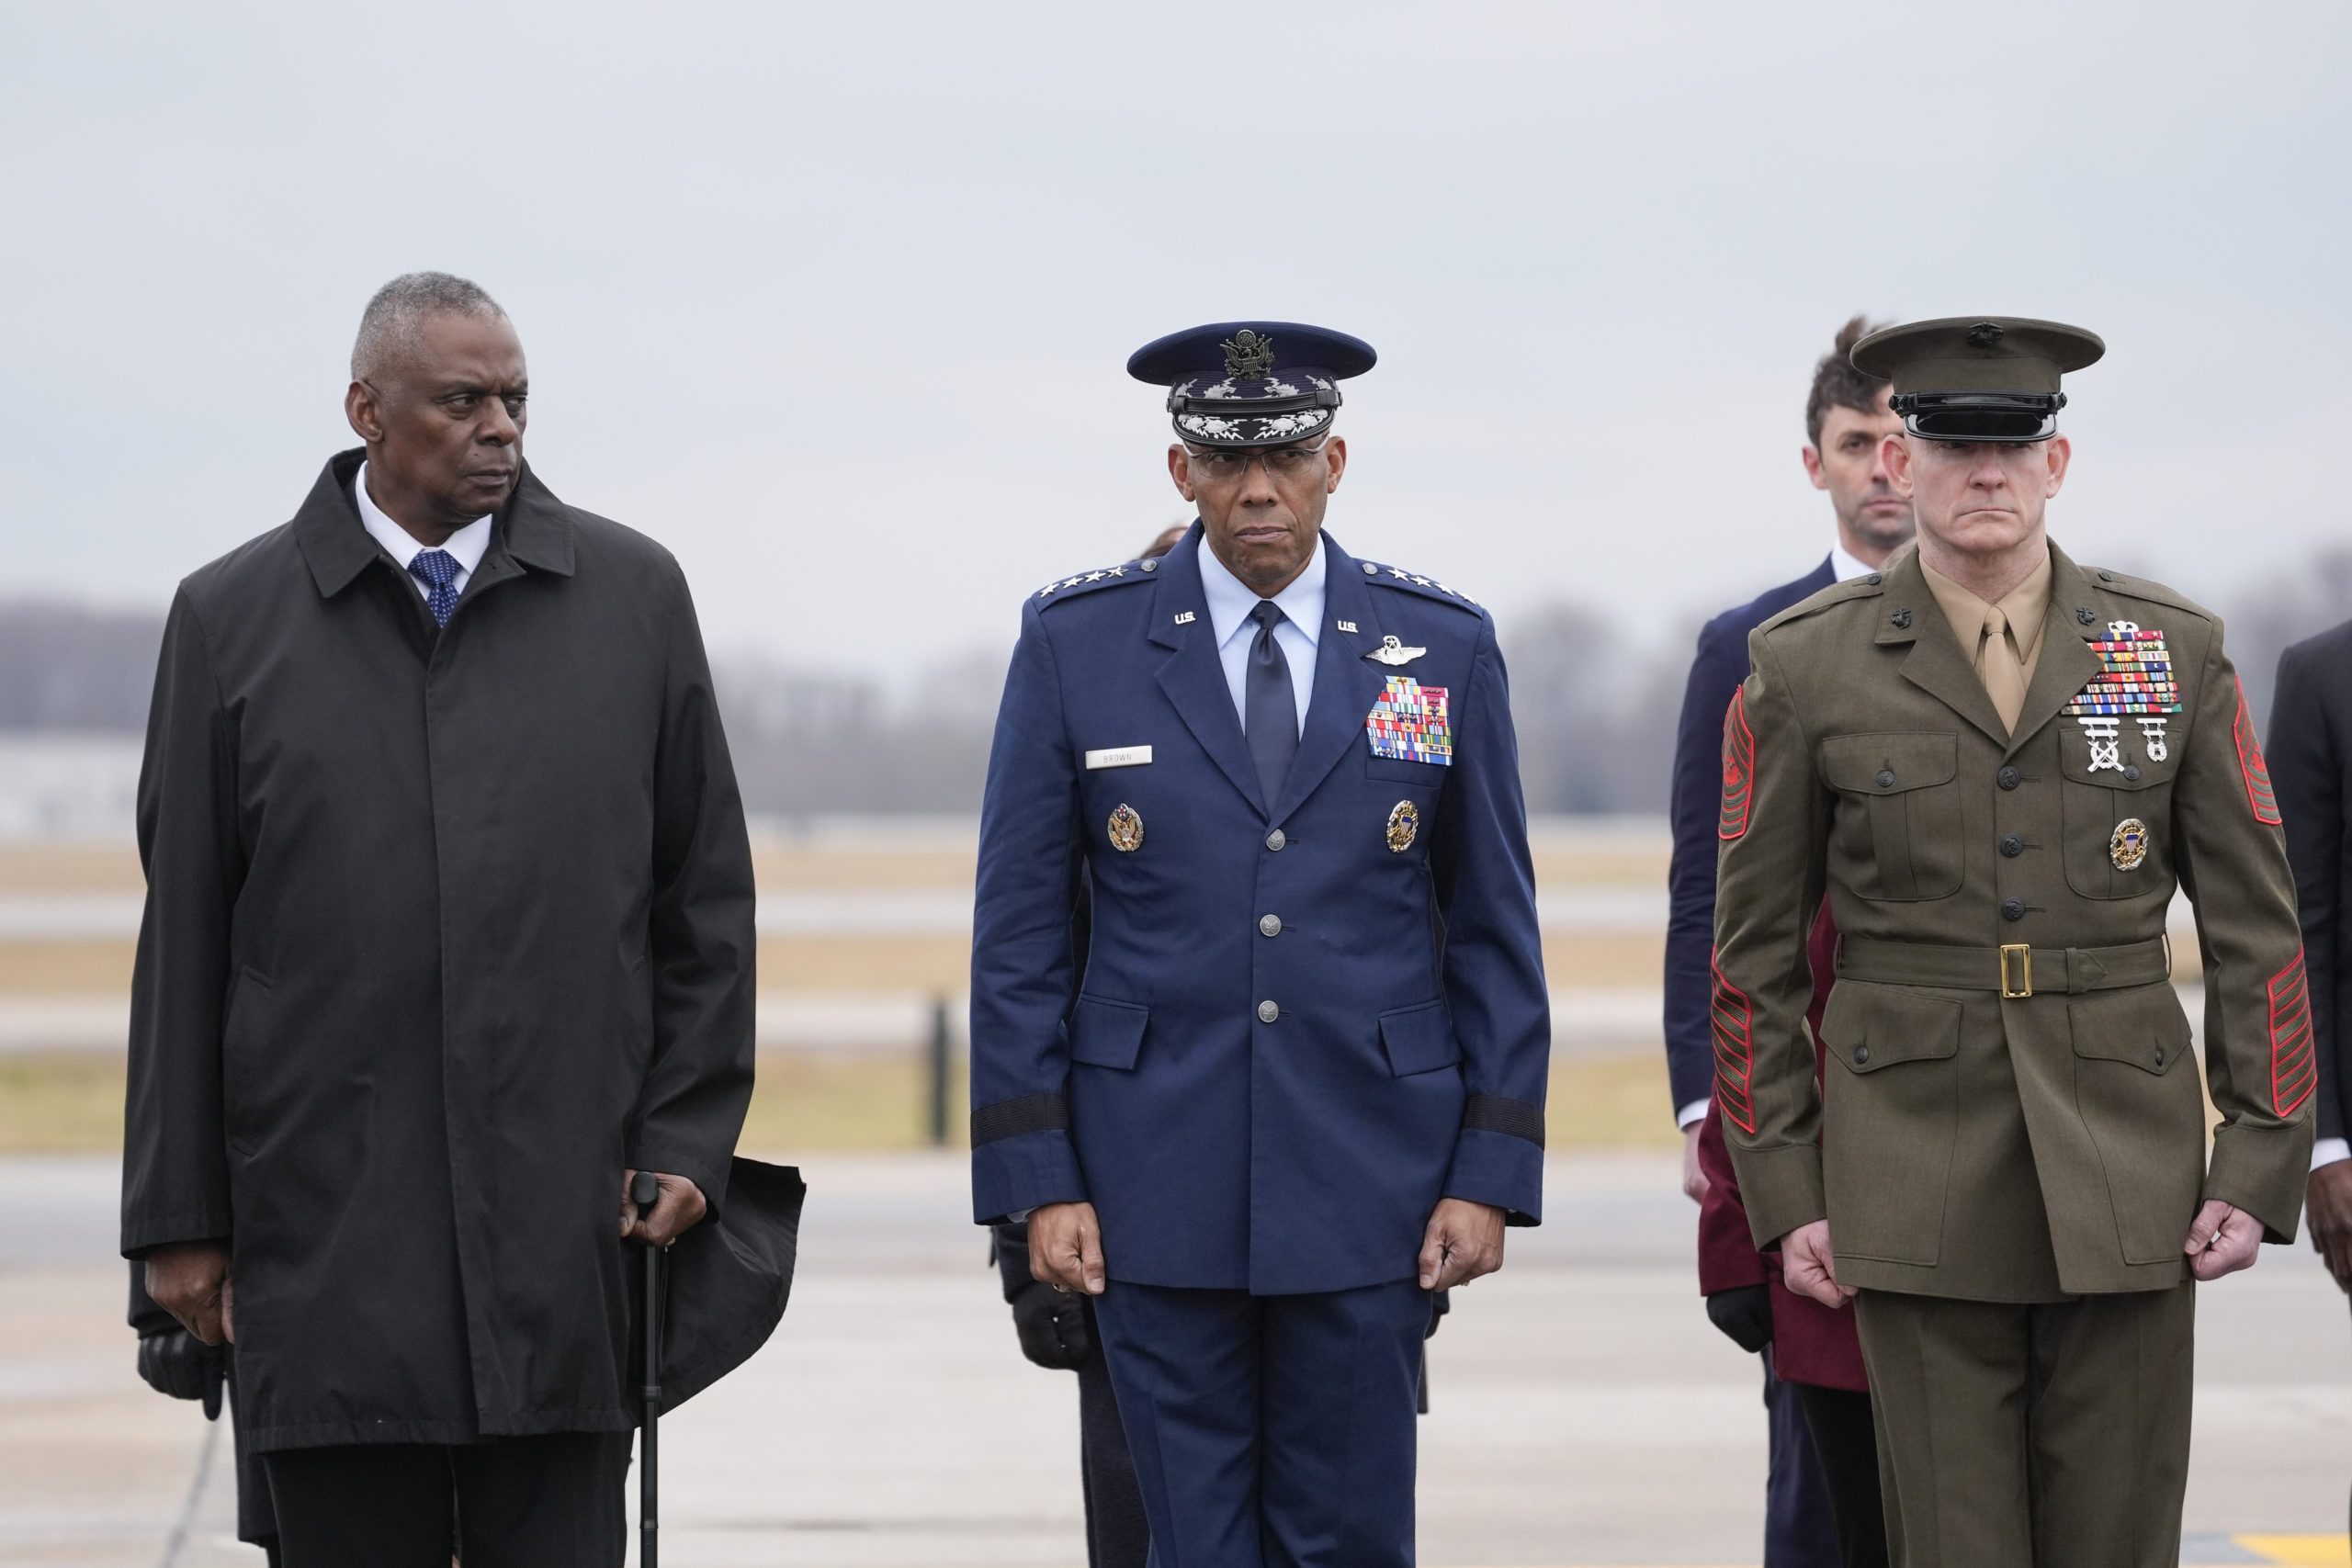 Defense Secretary Lloyd Austin, Chairman of the Joint Chiefs of Staff Gen. Charles Q. Brown, and Marine Corps. Sgt. Maj. Troy E. Black watch as an Army carry team moves the flag-draped transfer case containing the remains of U.S. Army Sgt. Kennedy Ladon Sanders, 24, of Waycross, Georgia, during a casualty return at Dover Air Force Base in Delaware on Friday. Sanders was killed in a drone attack in Jordan on Sunday.